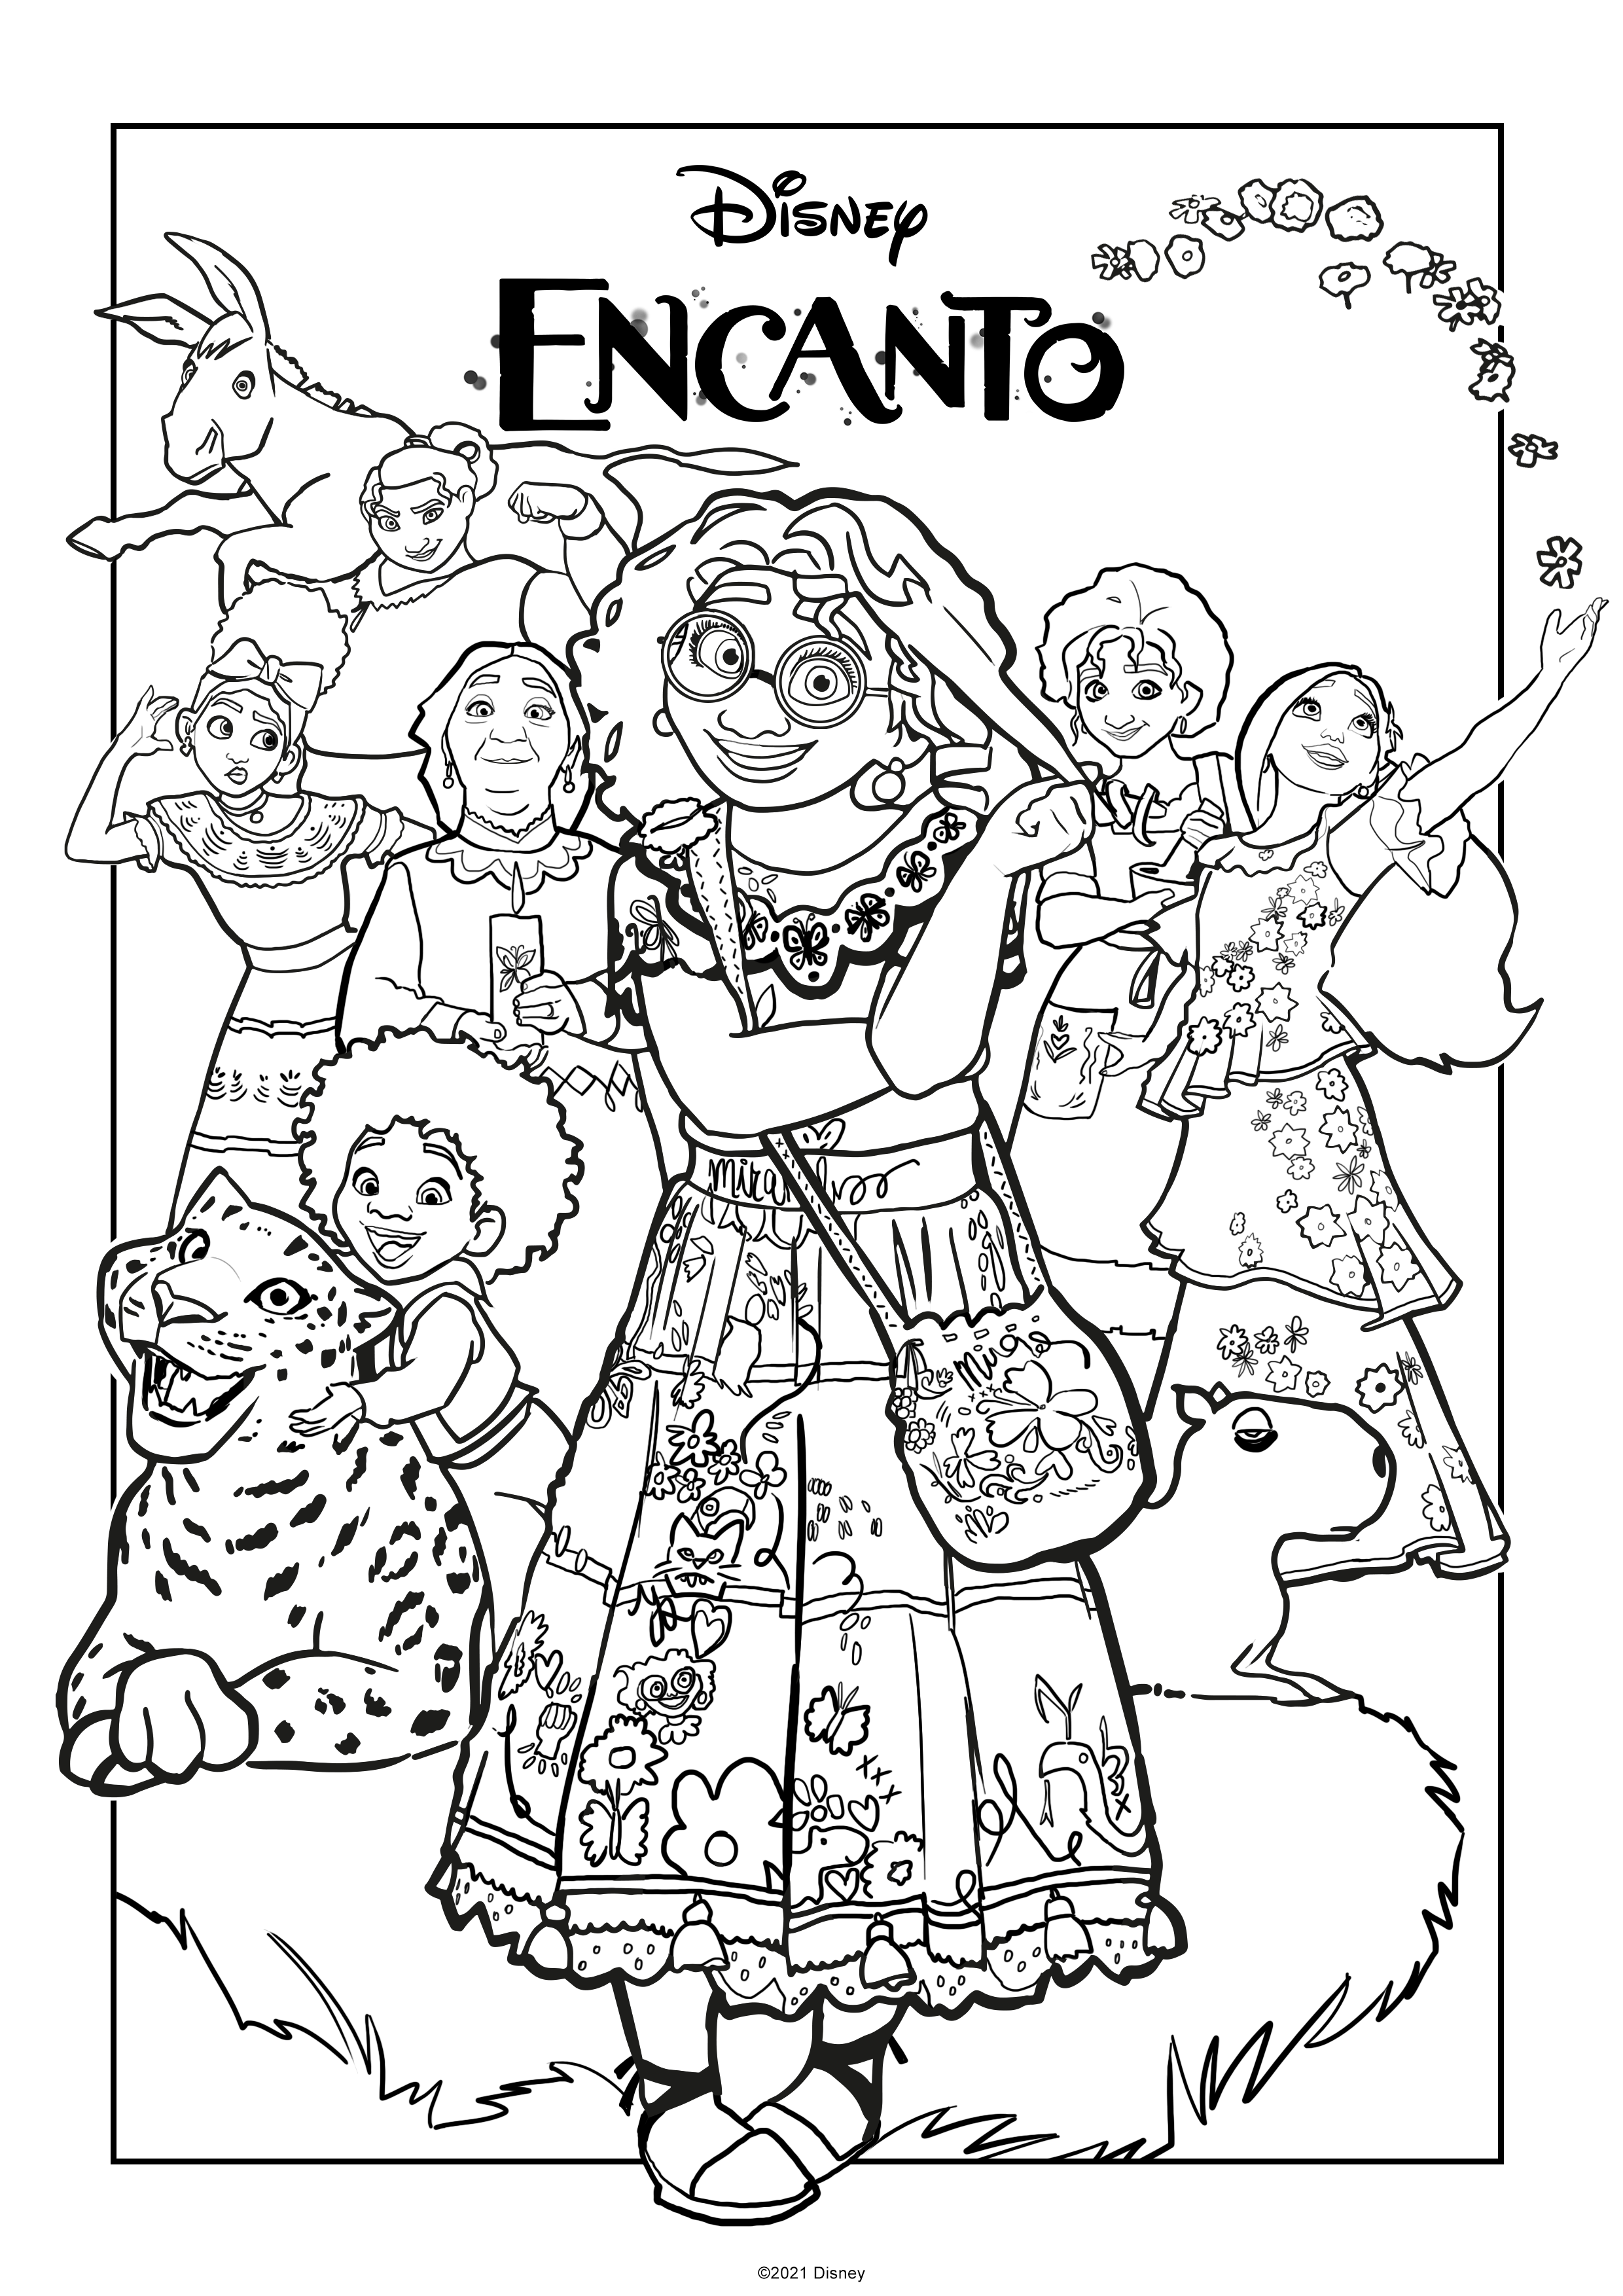 Encanto coloring pages and activity pack simply sweet days